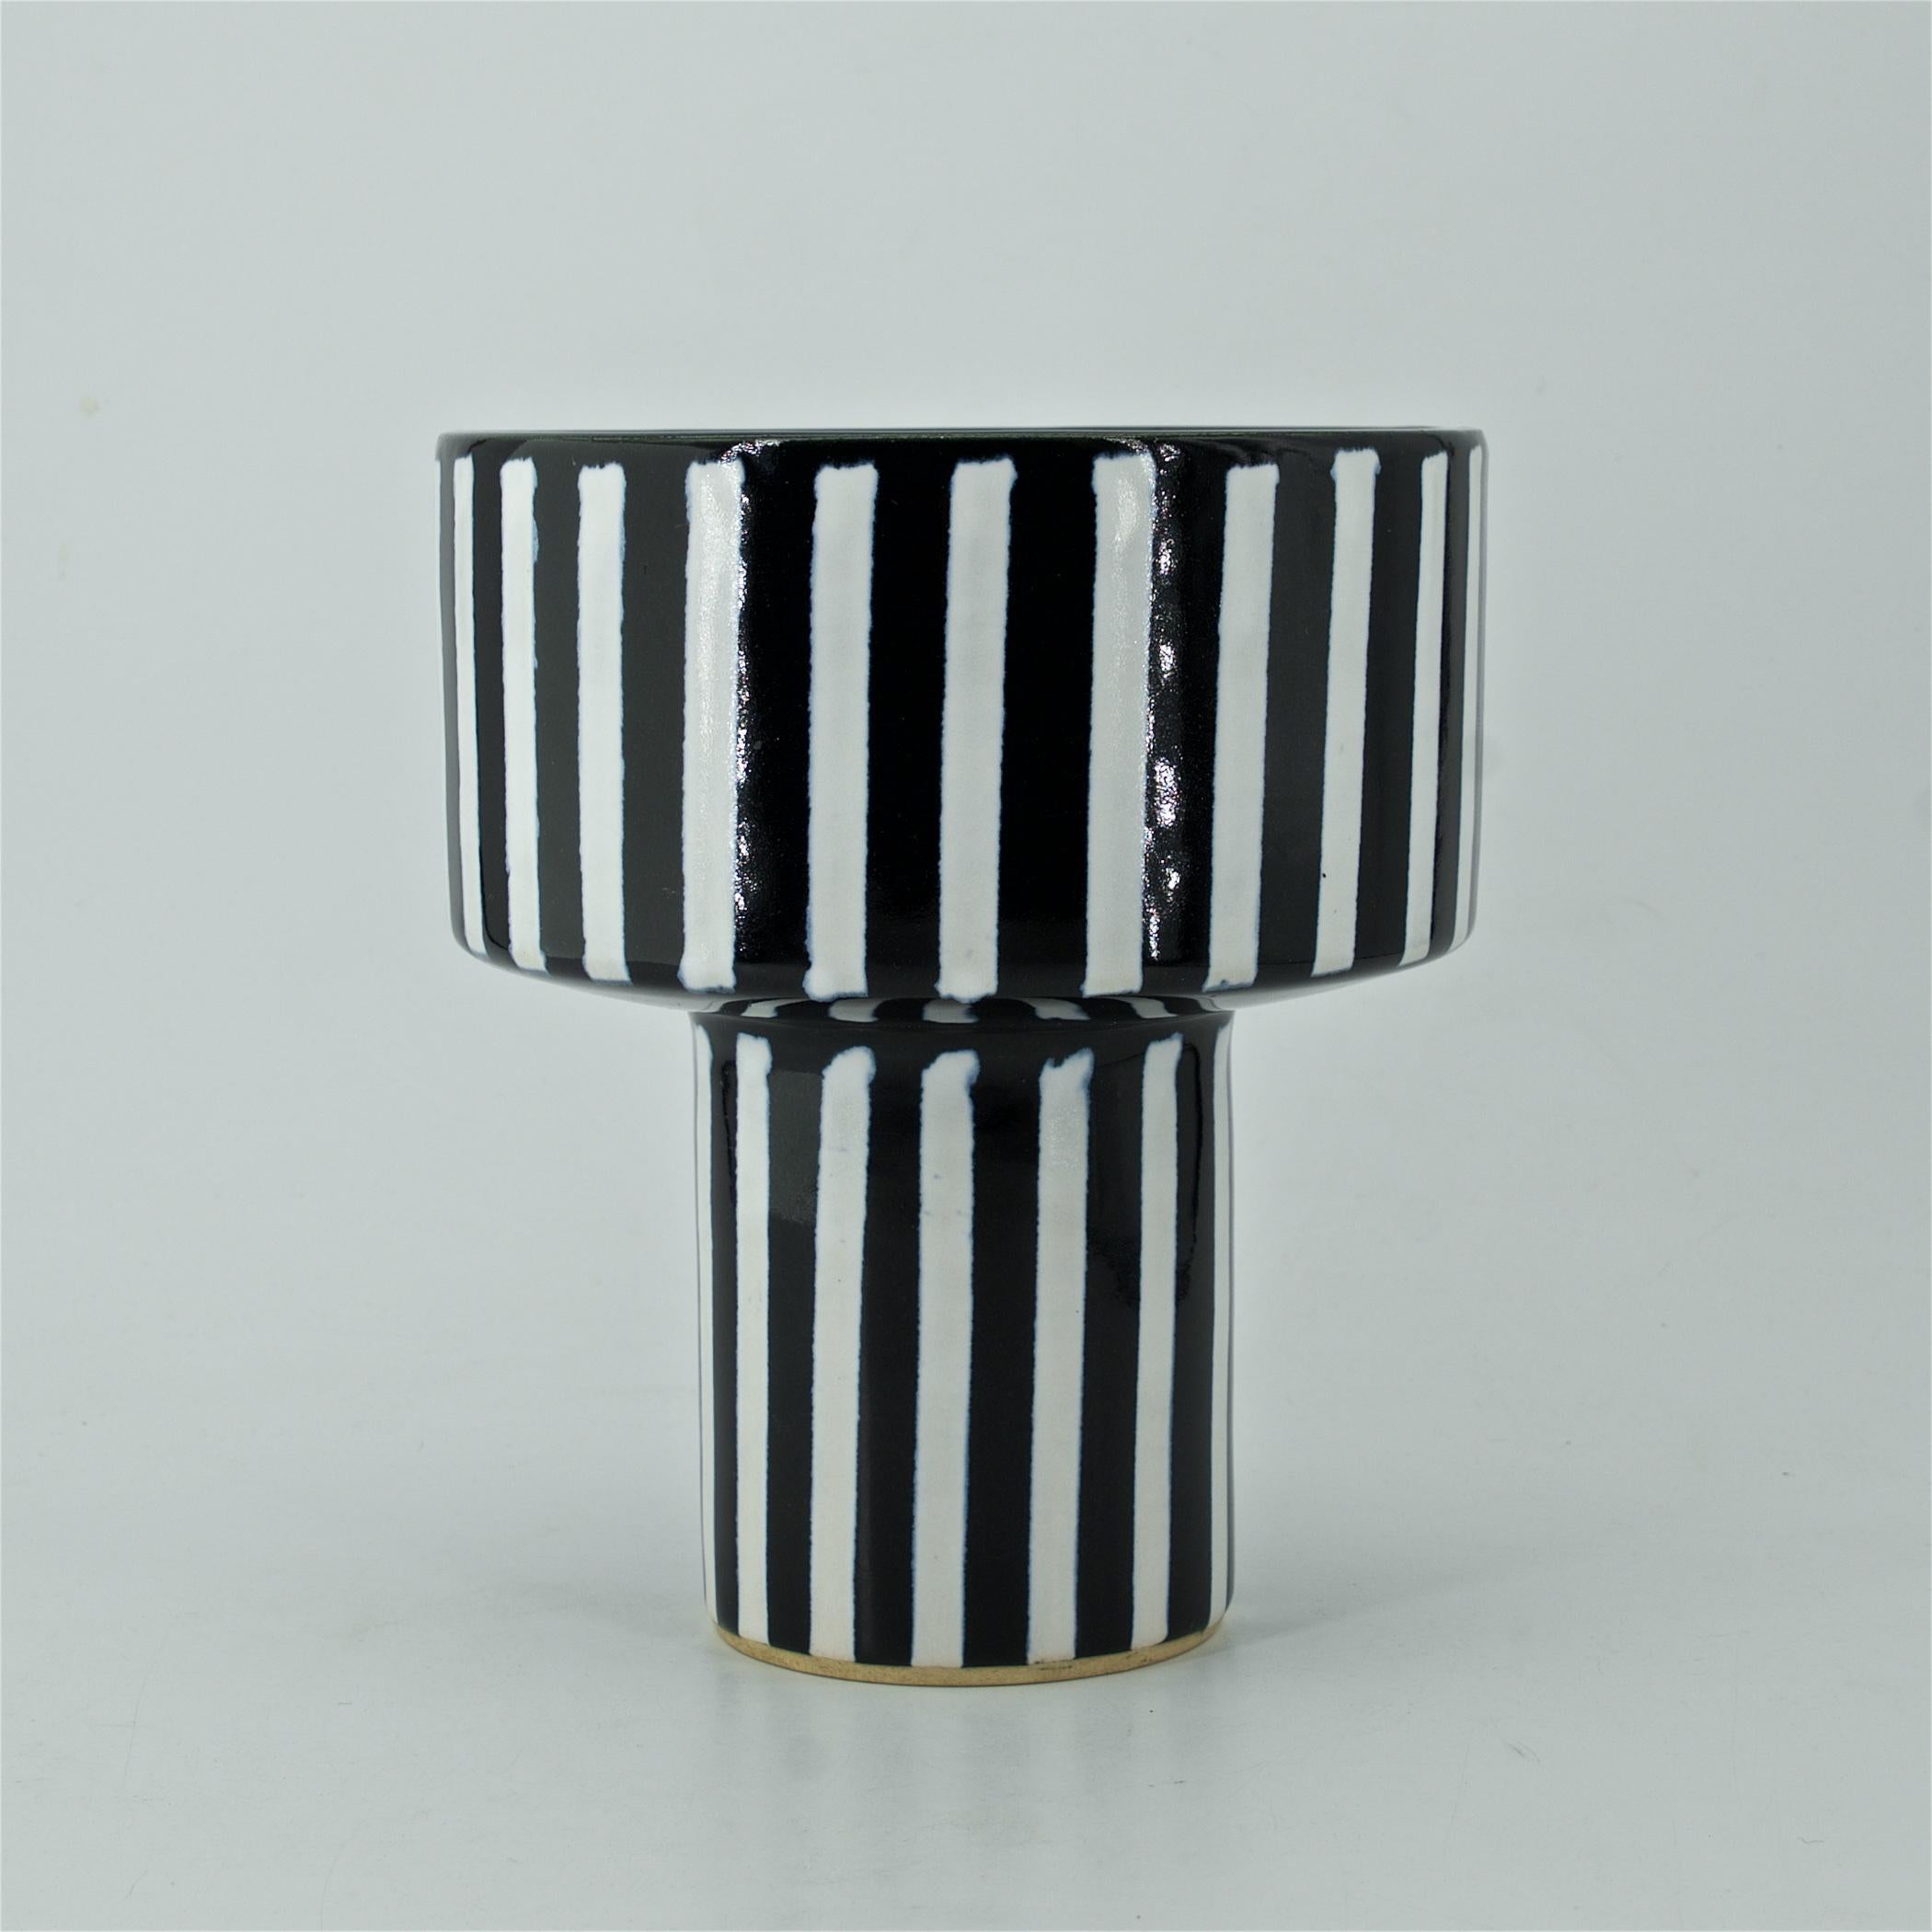 Very clean, appears unused, black and white stripes, planter on narrow pedestal.